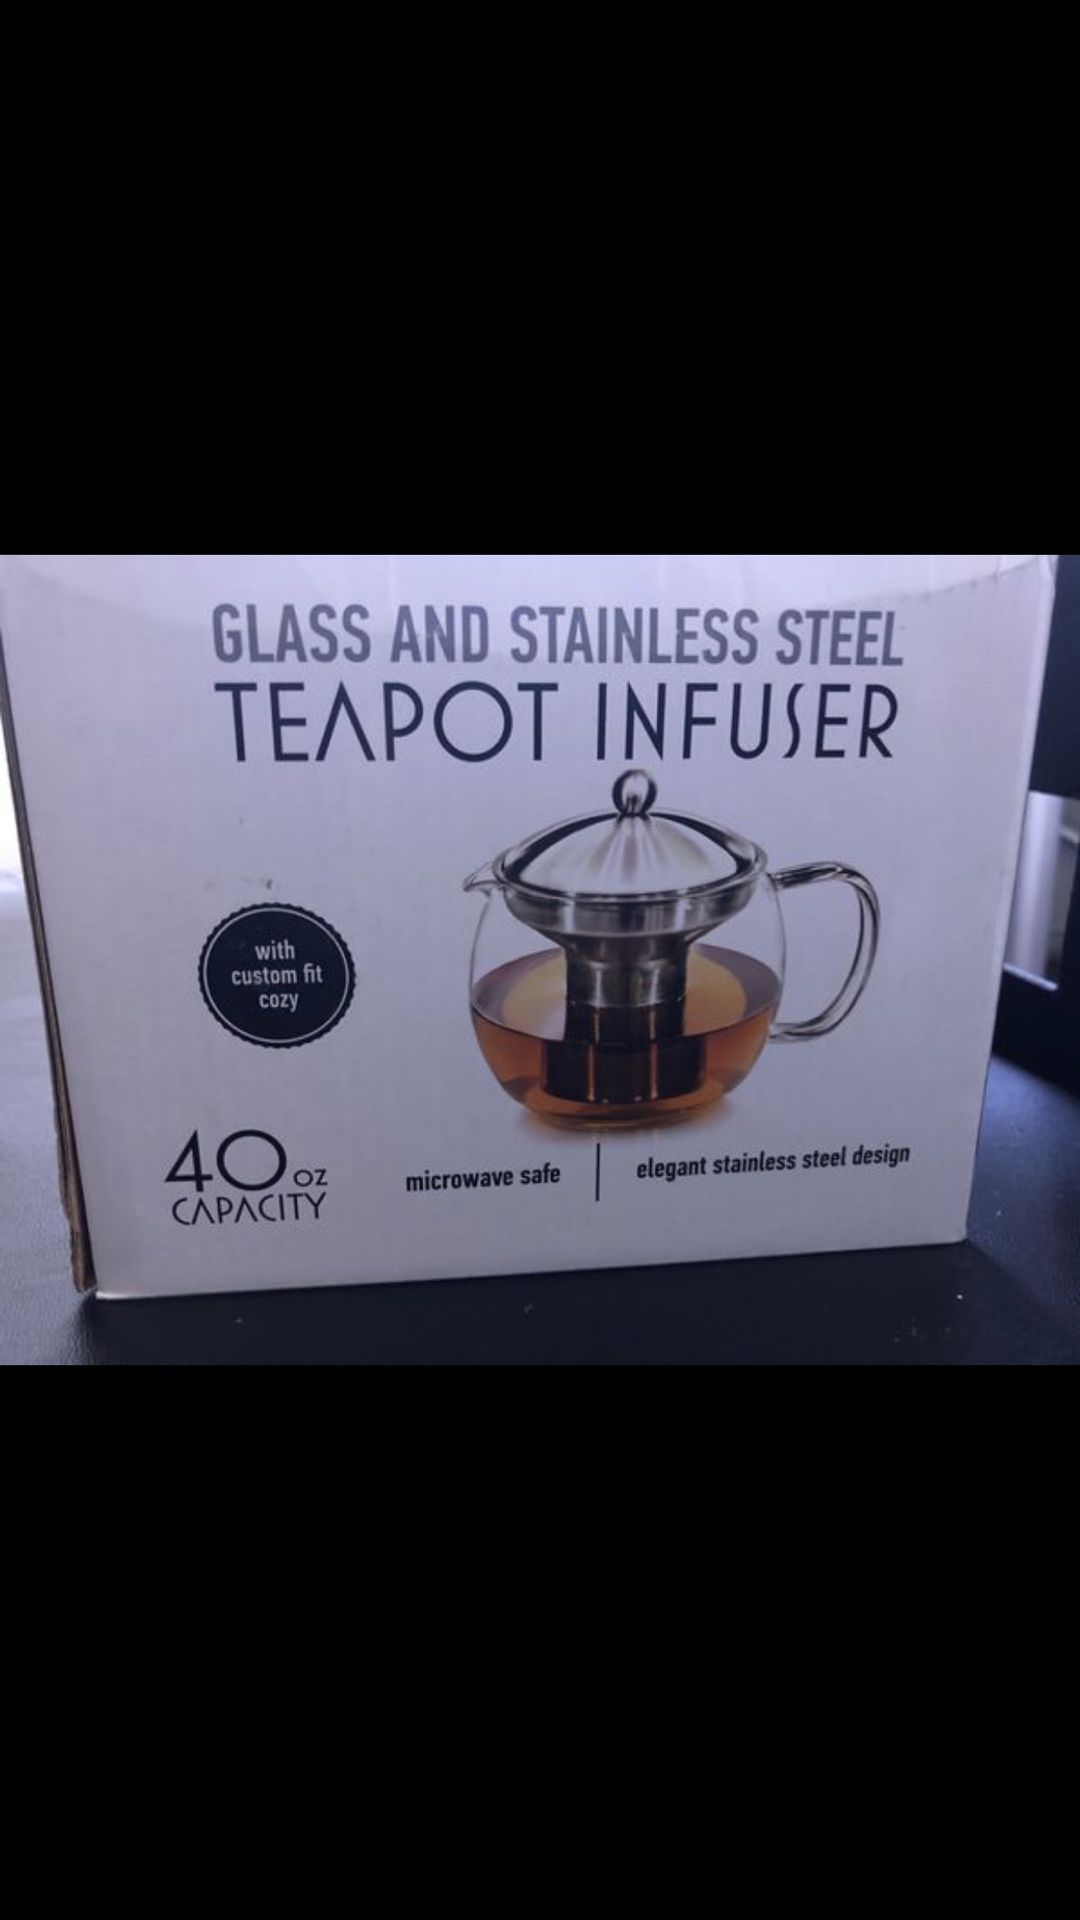 Glass and stainless steel teapot infused- Brand new